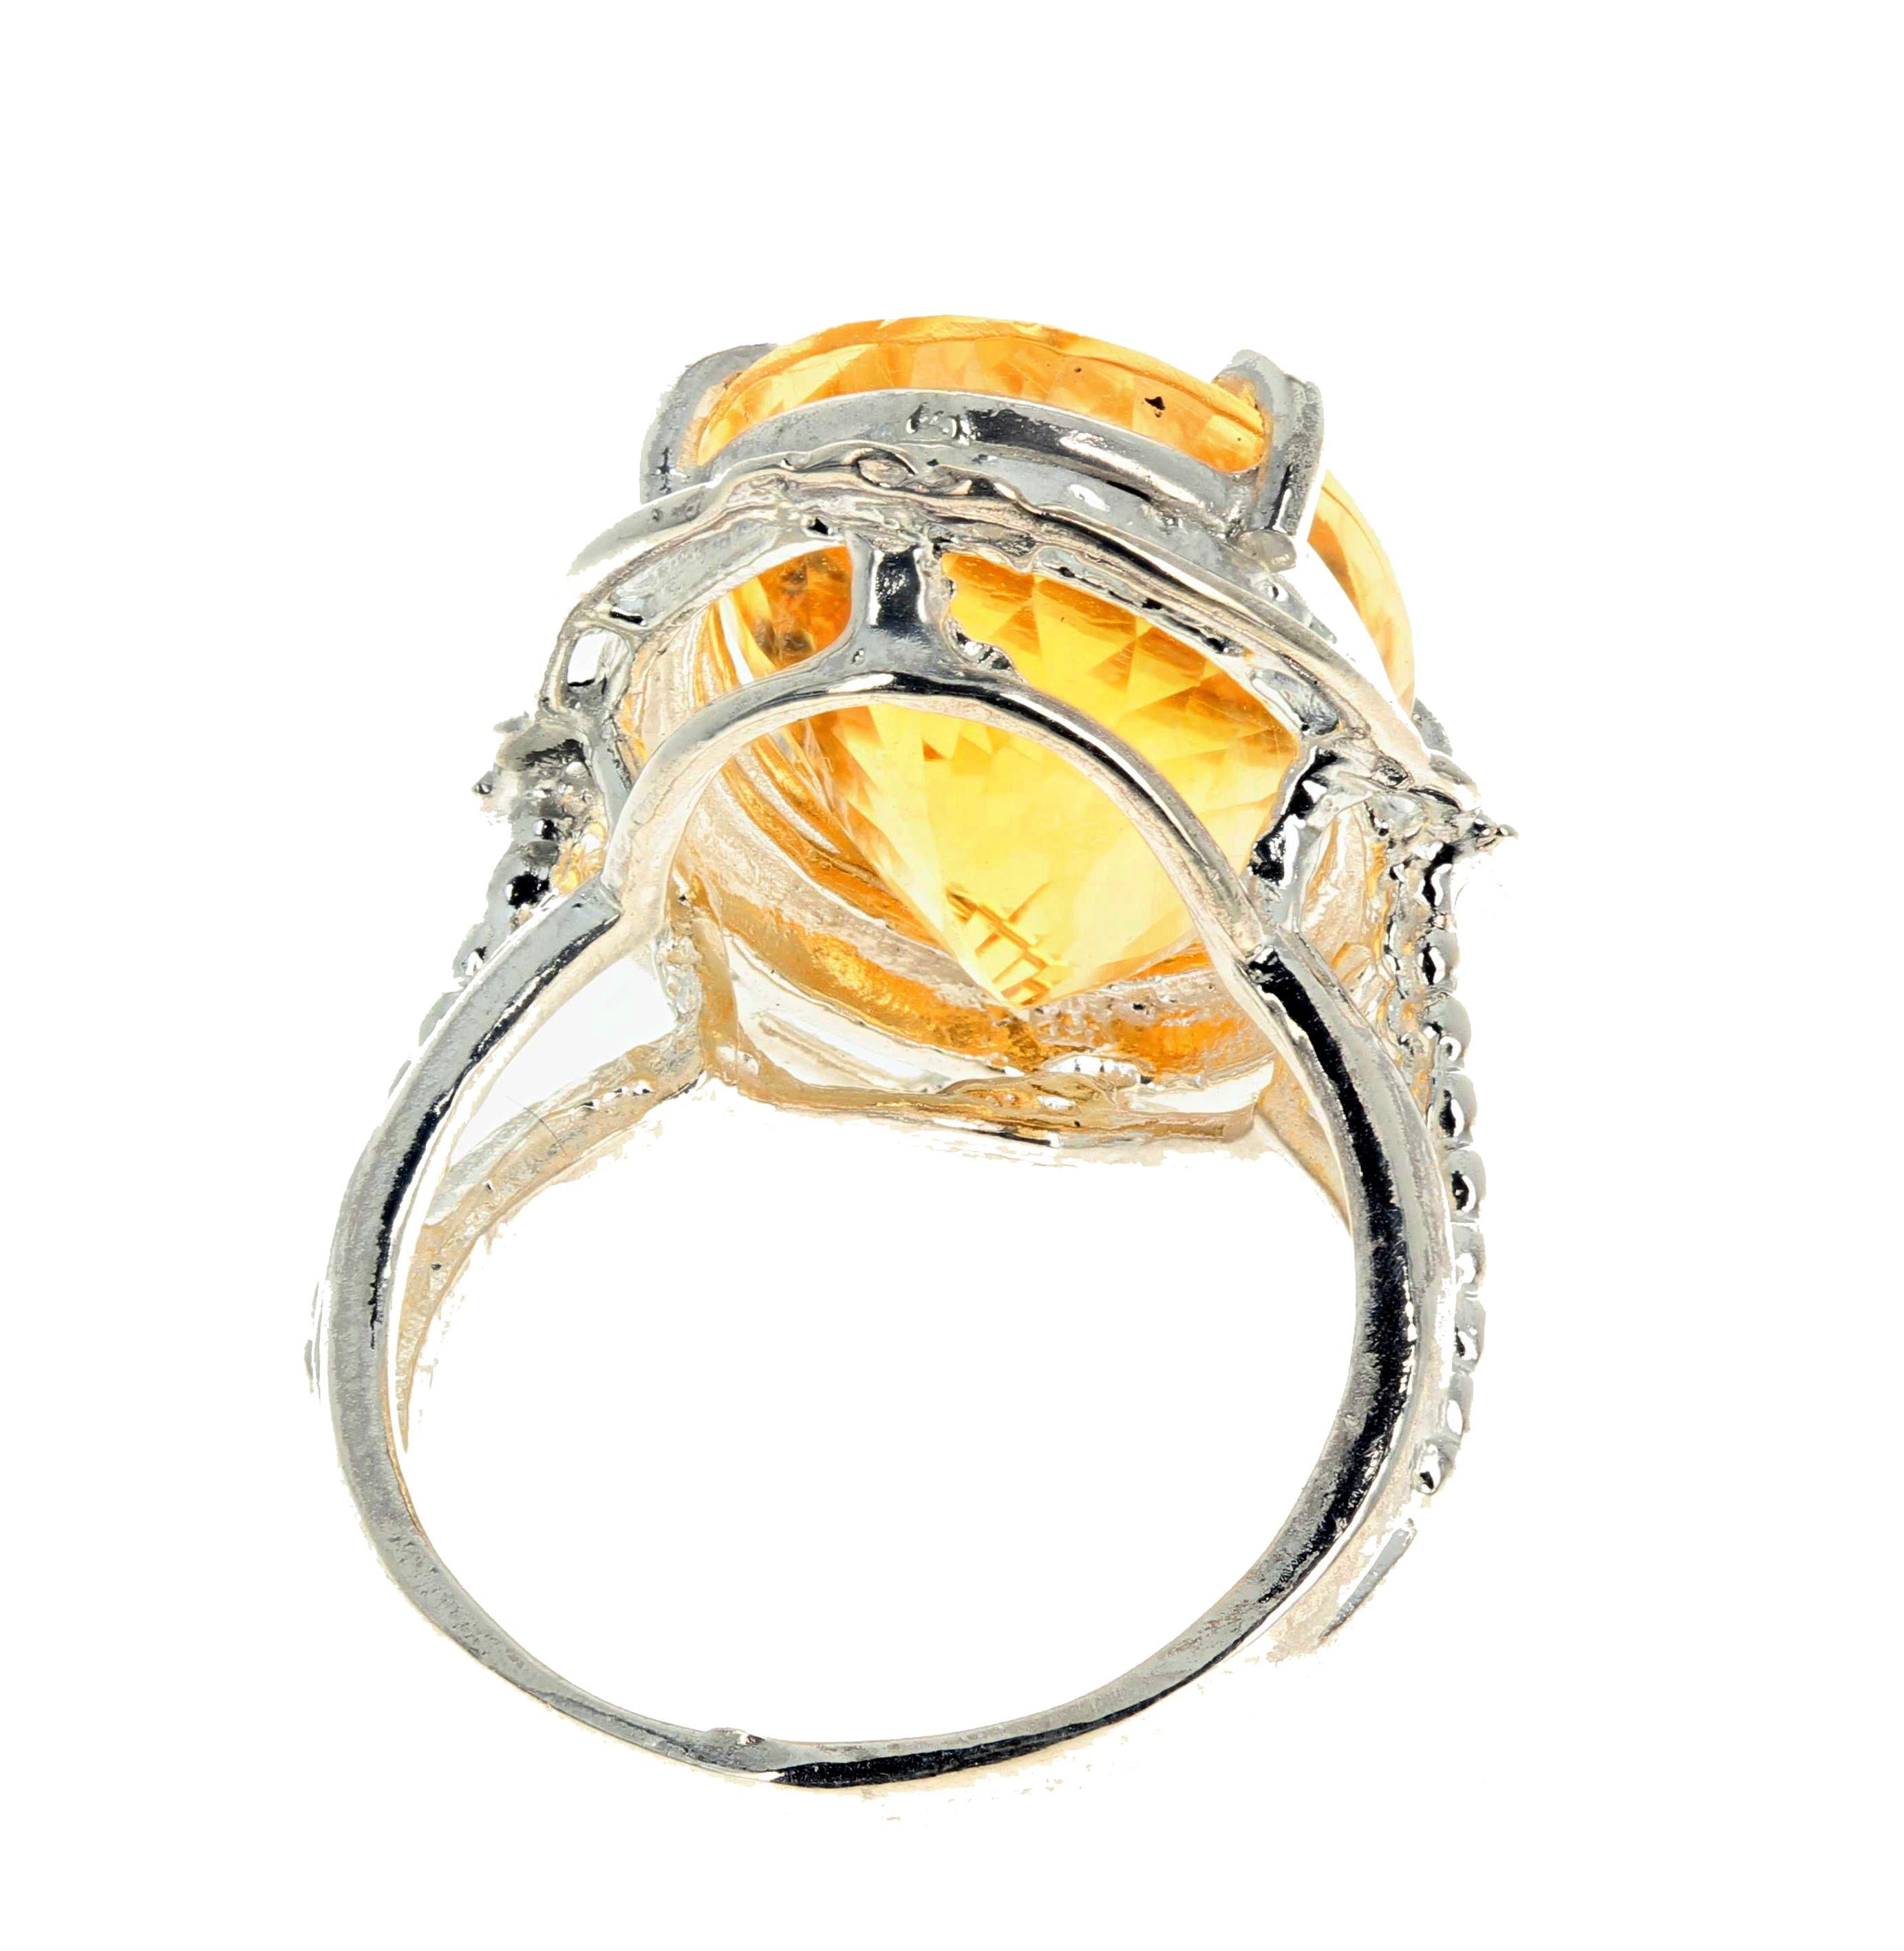 Oval Cut AJD Gorgeous 11.52 Ct. Brilliant Glittering Natural Yellow Goldy Citrine Ring For Sale